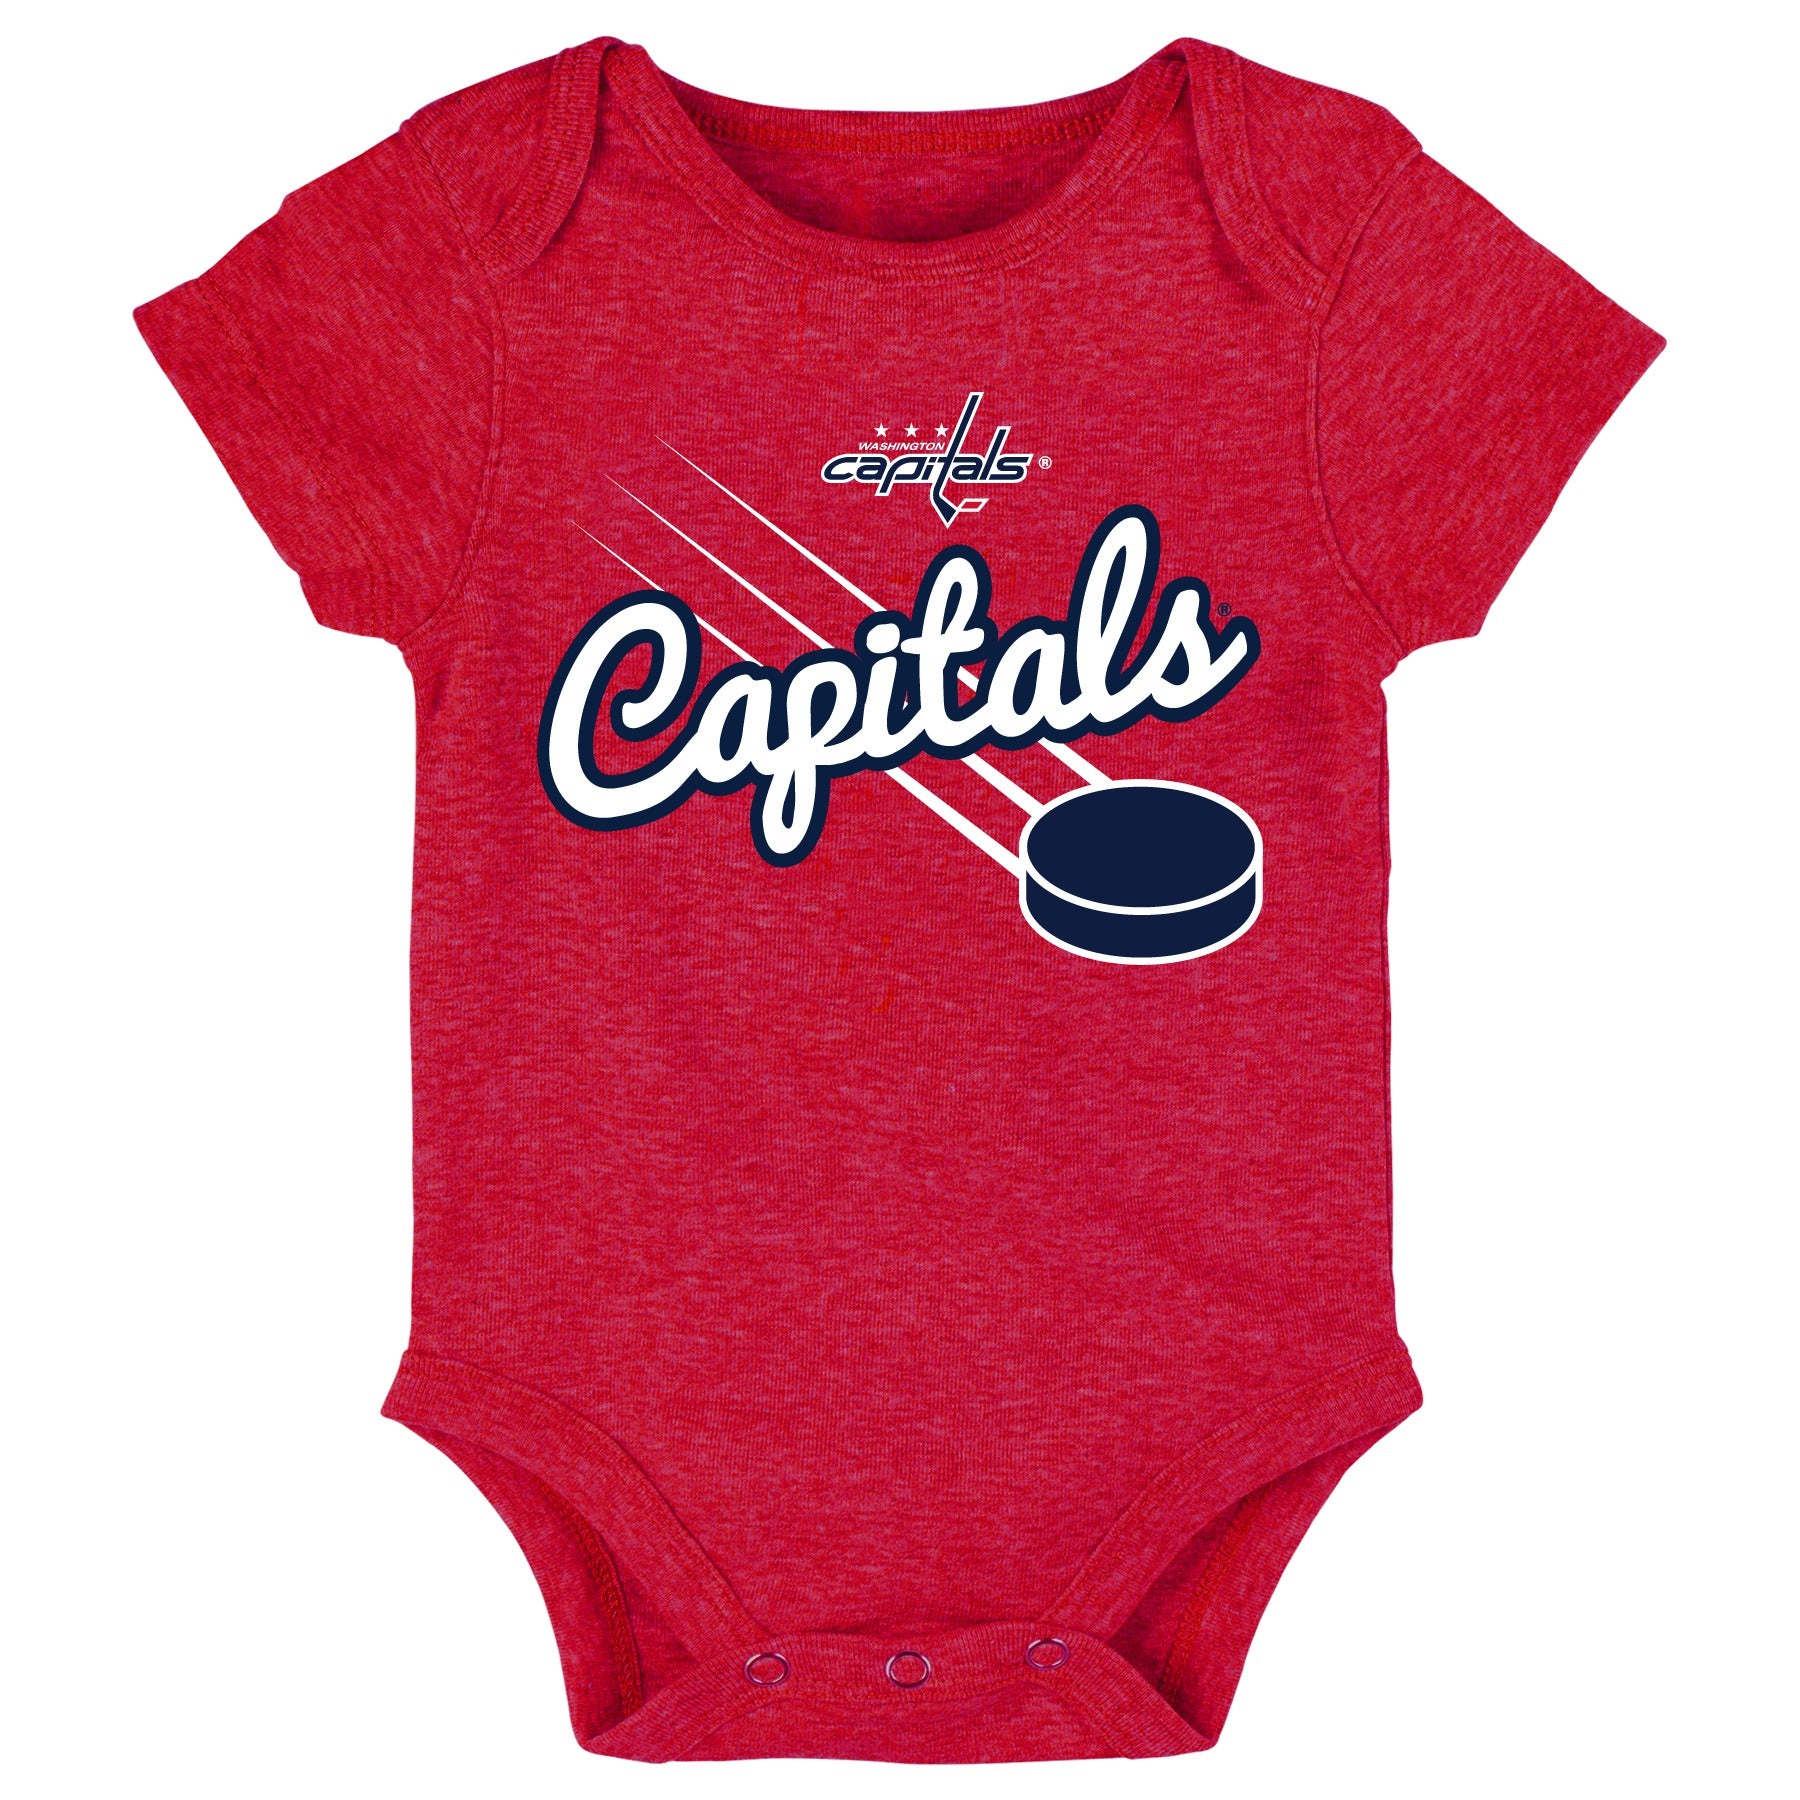  Outerstuff Washington Capitals Toddler Sizes 2T-4T